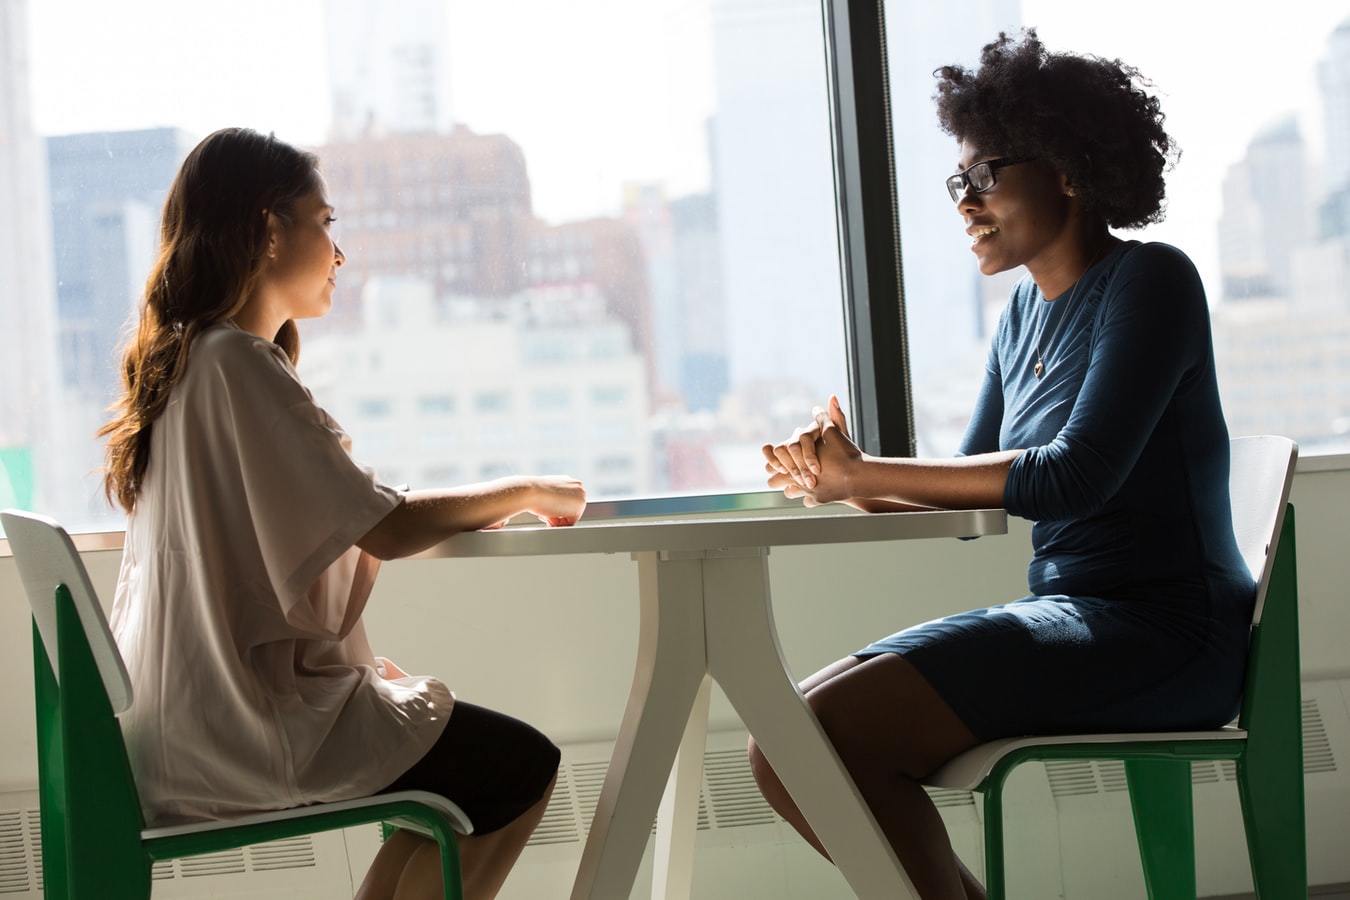 Two women talking at a table, practicing for an interview.